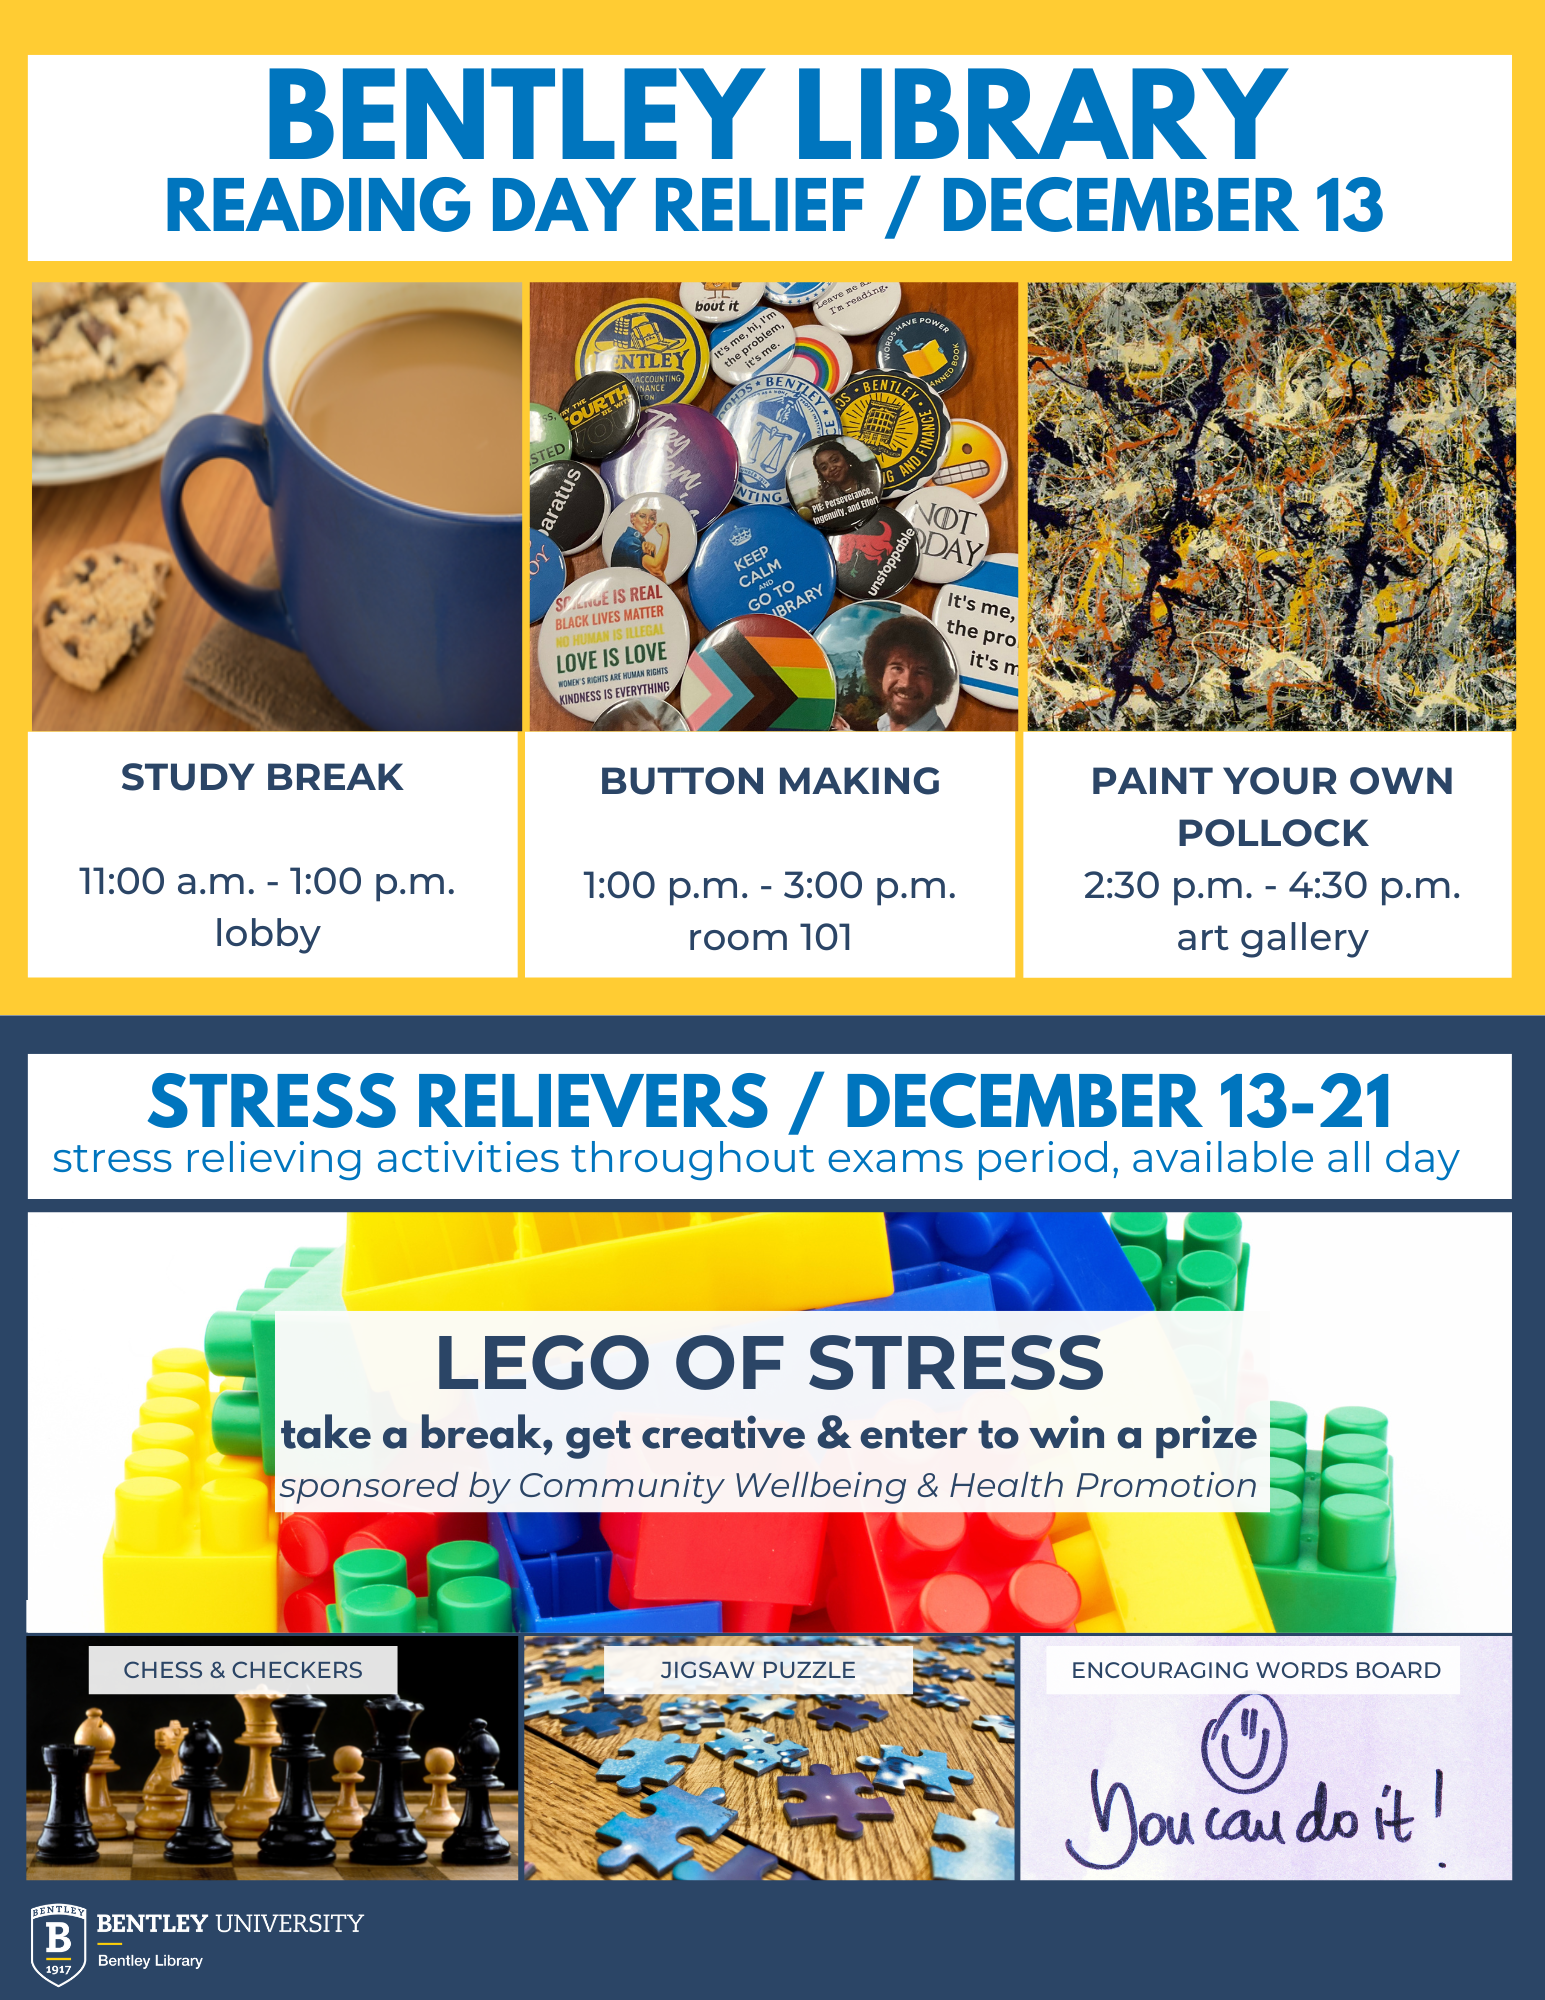 Flyer for event depicting images of activities being offered - coffee, buttons, Pollock painting, LEGO, chess, and puzzle pieces.